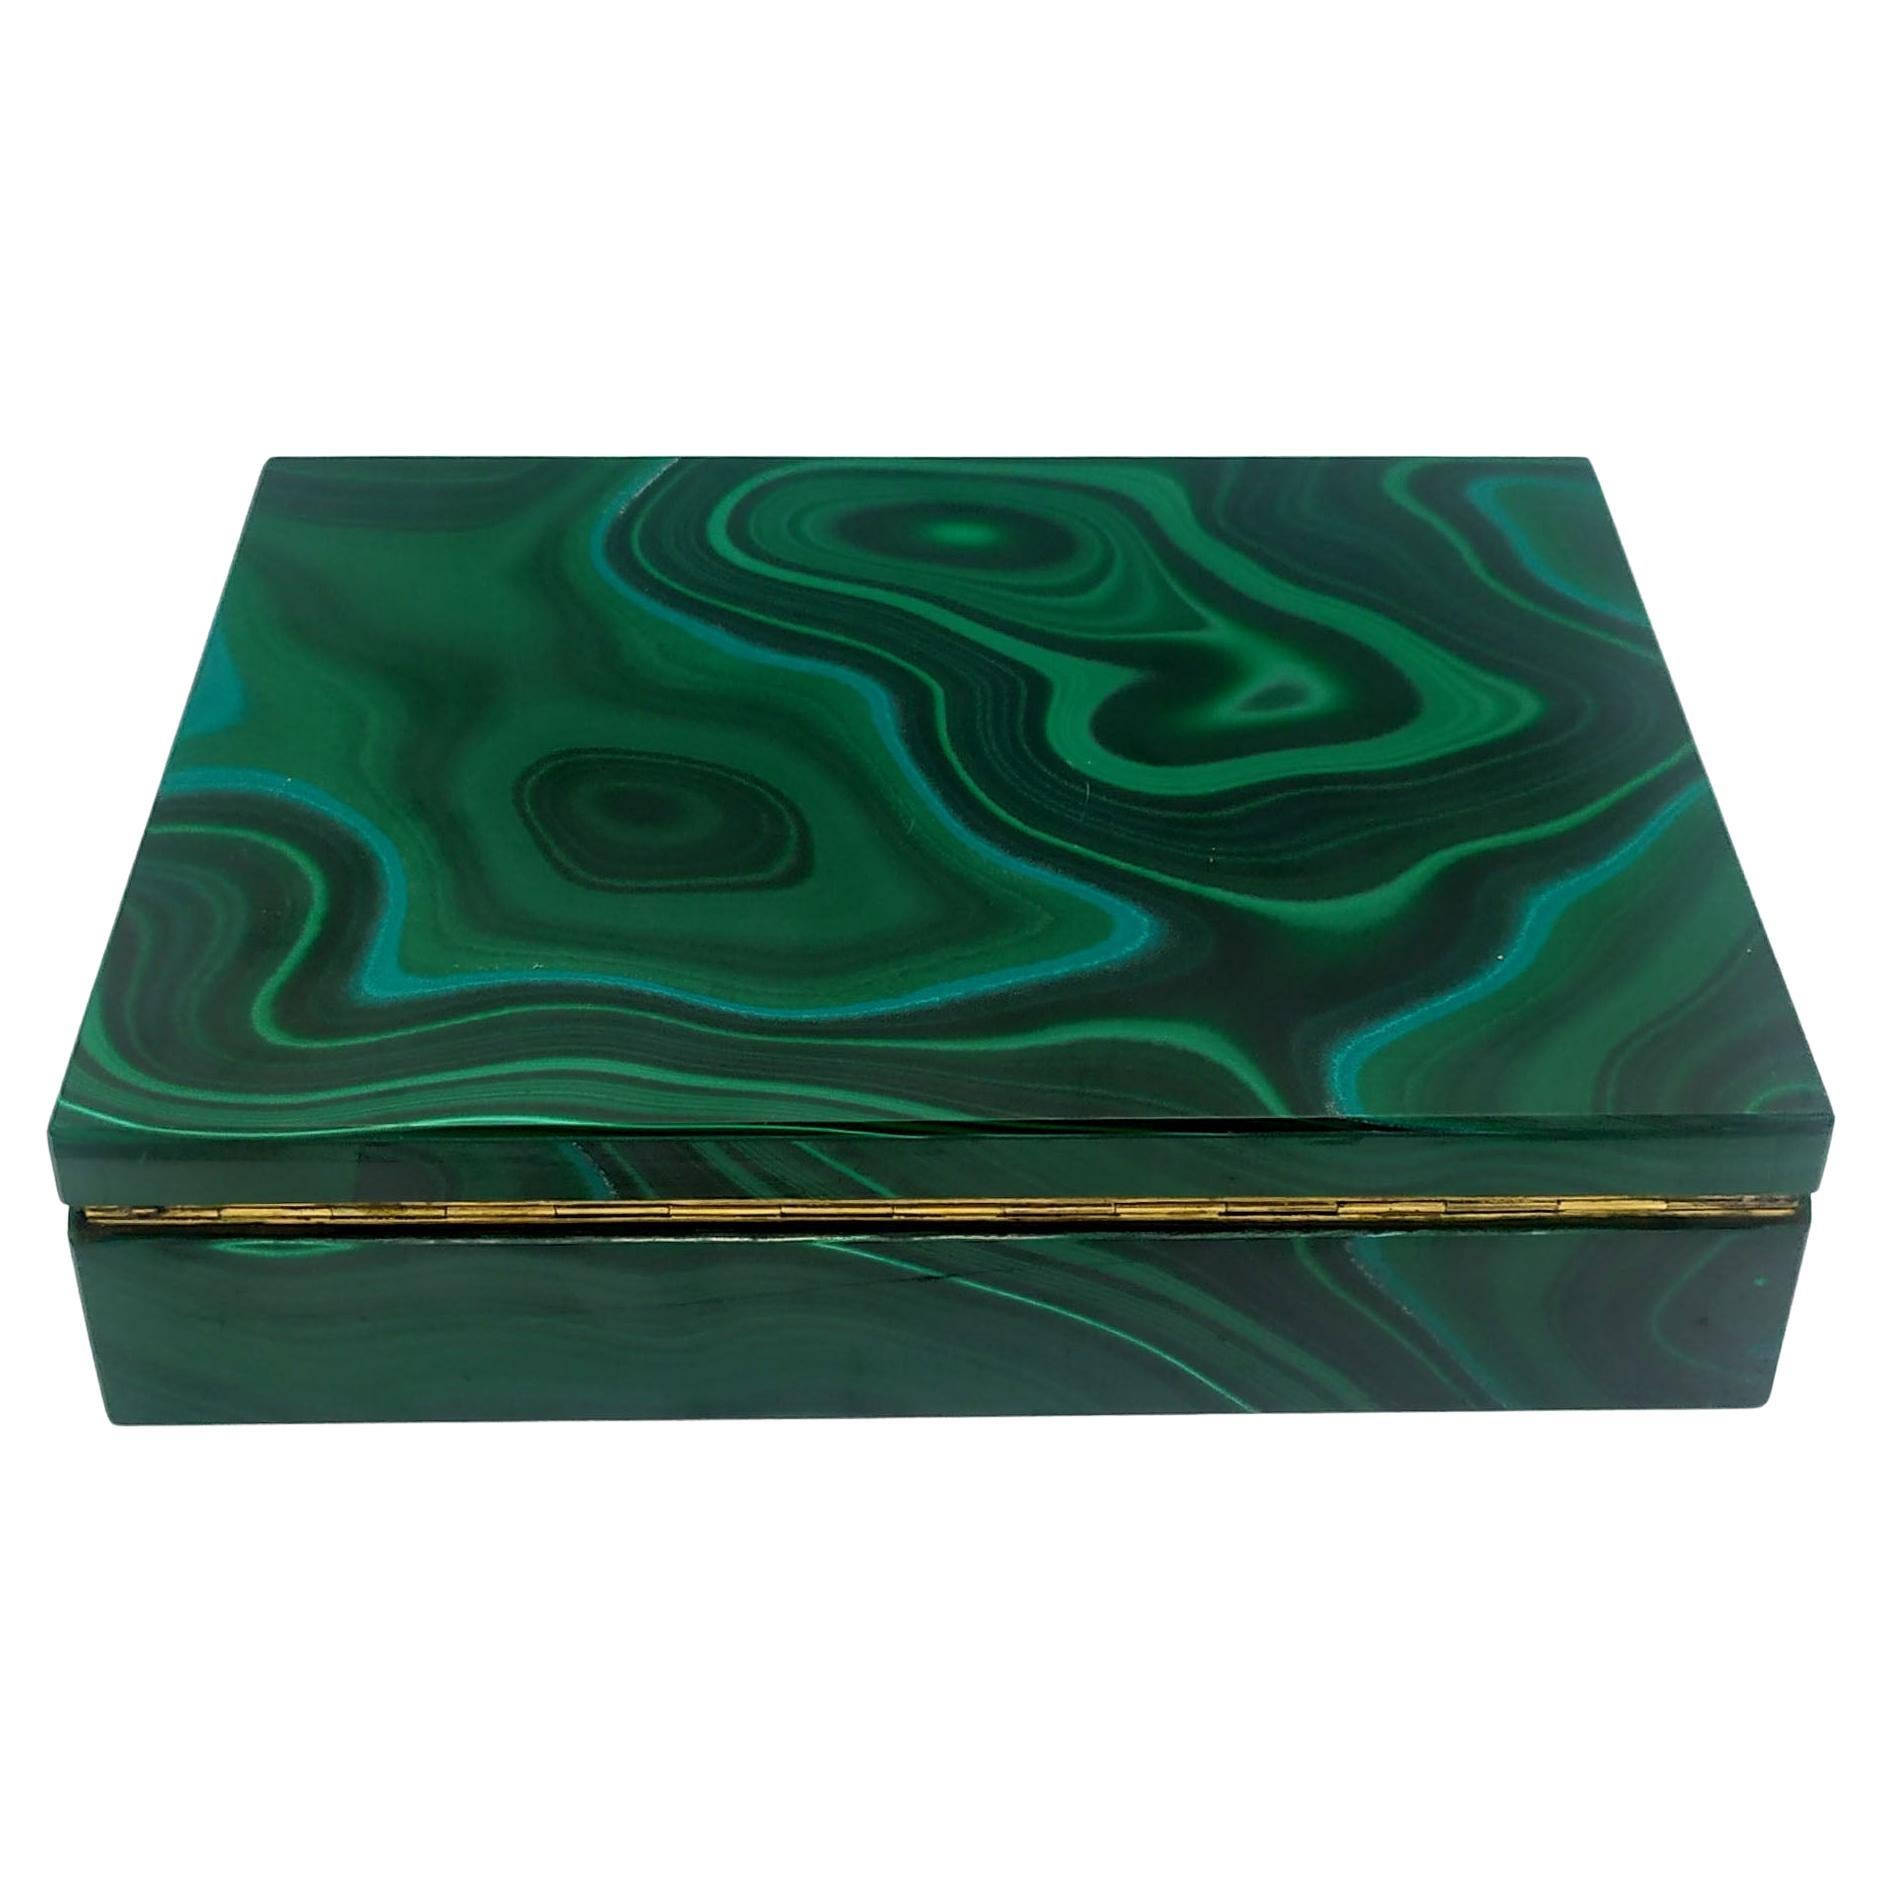 Large rectangular table box in malachite with hinged frame in 925/1000 sterling Silver gold plated. The malachite is a large single whole slab on the lid and the stone design becomes continuous on the sides. The interior is onyx from Pakistan.